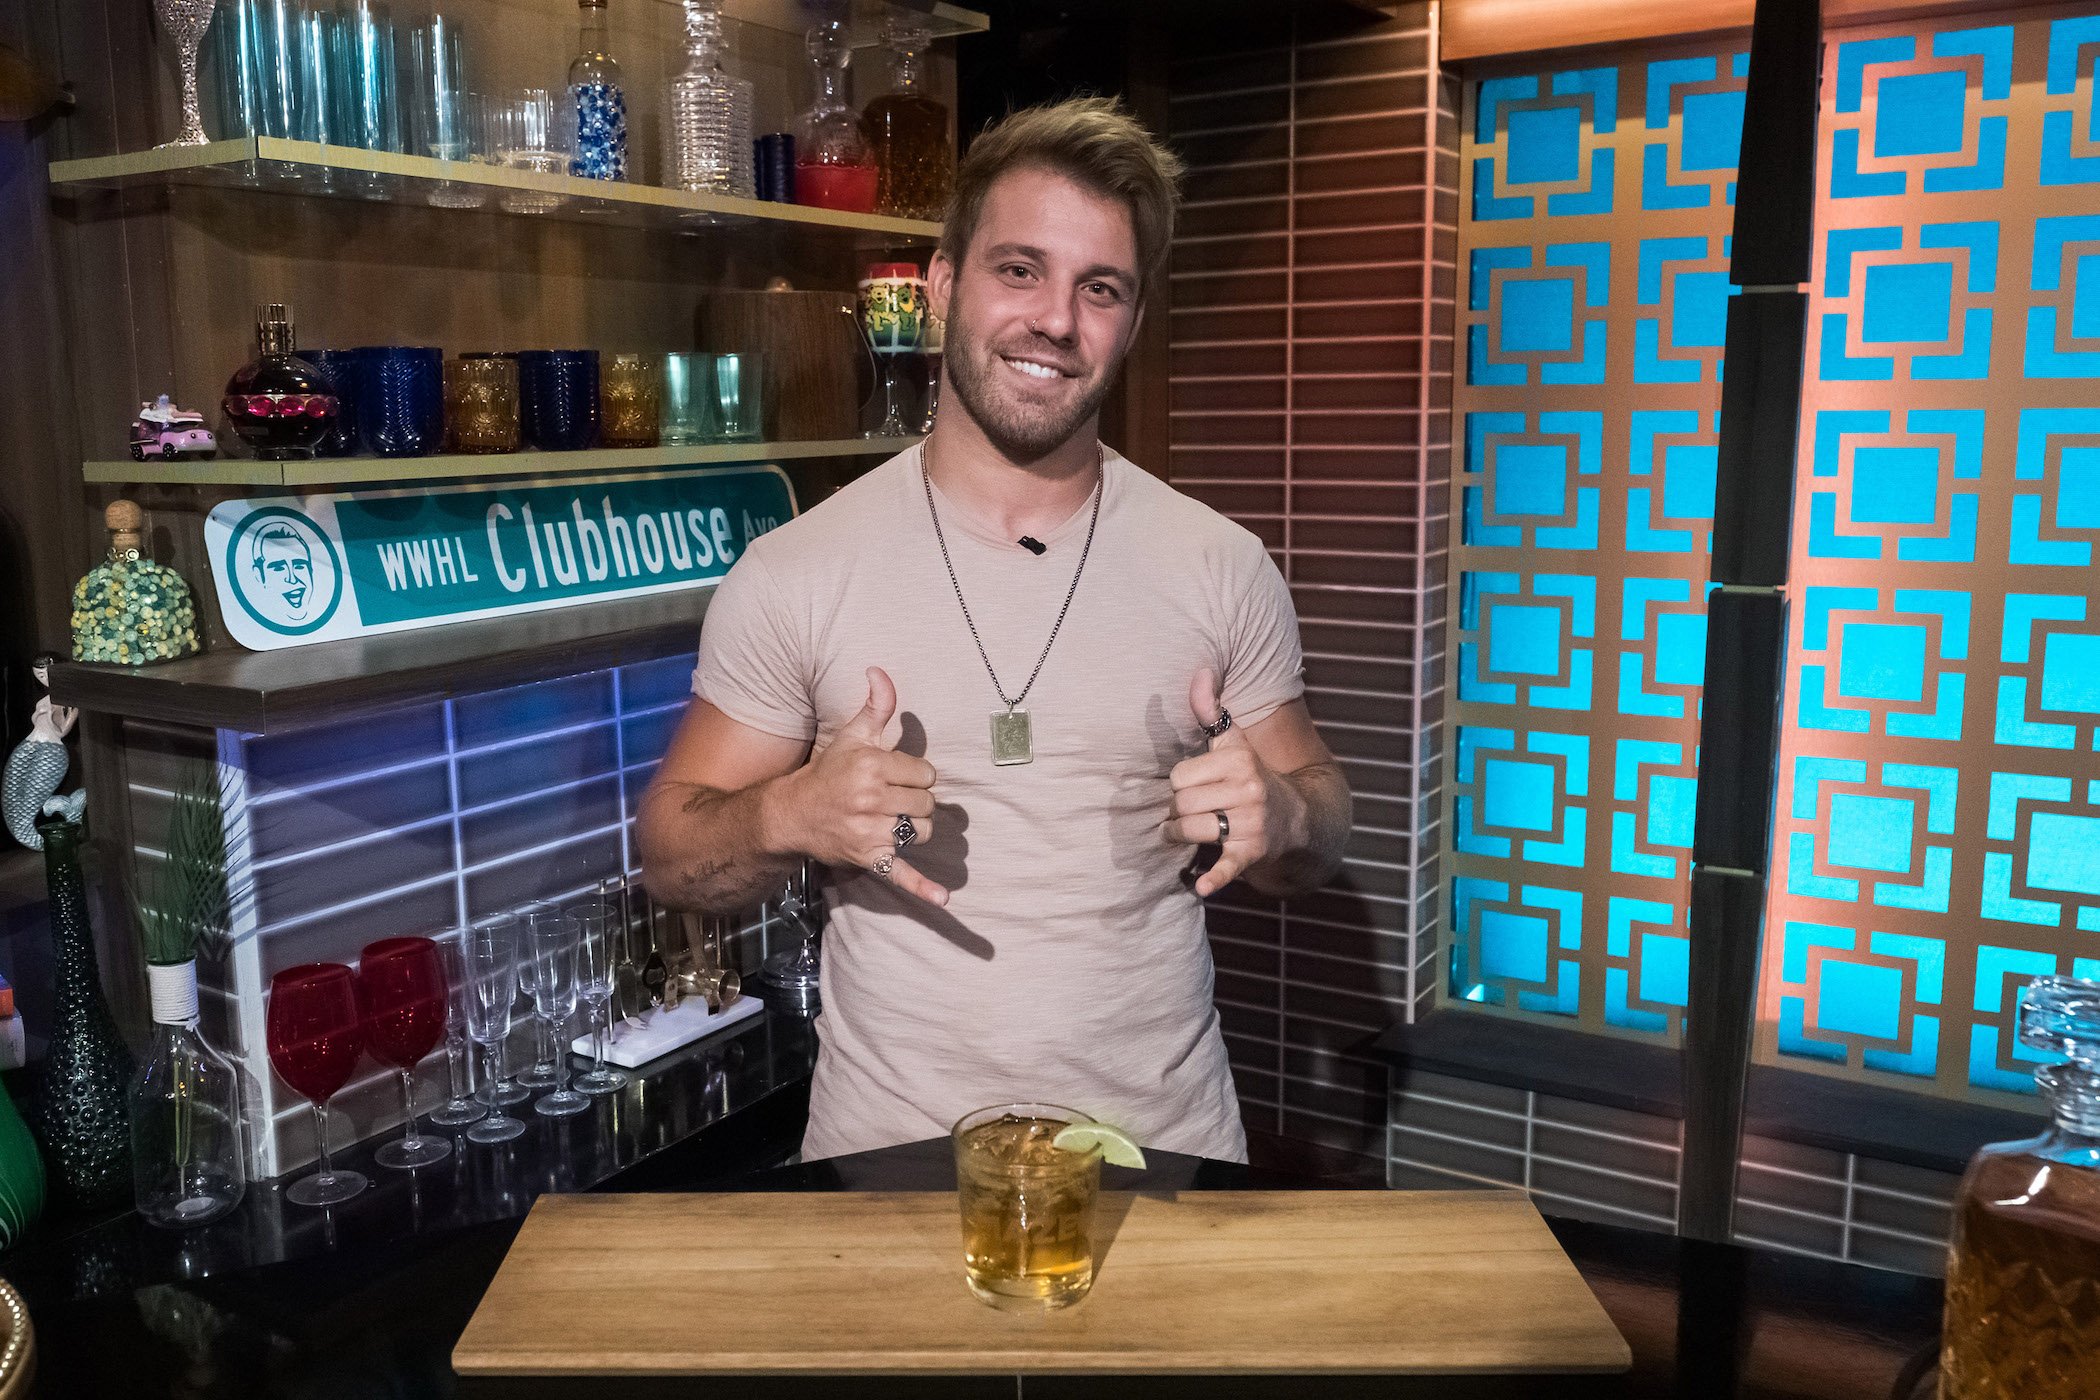 Paulie Calafiore from MTV's 'The Challenge' posing while on 'Watch What Happens Live'